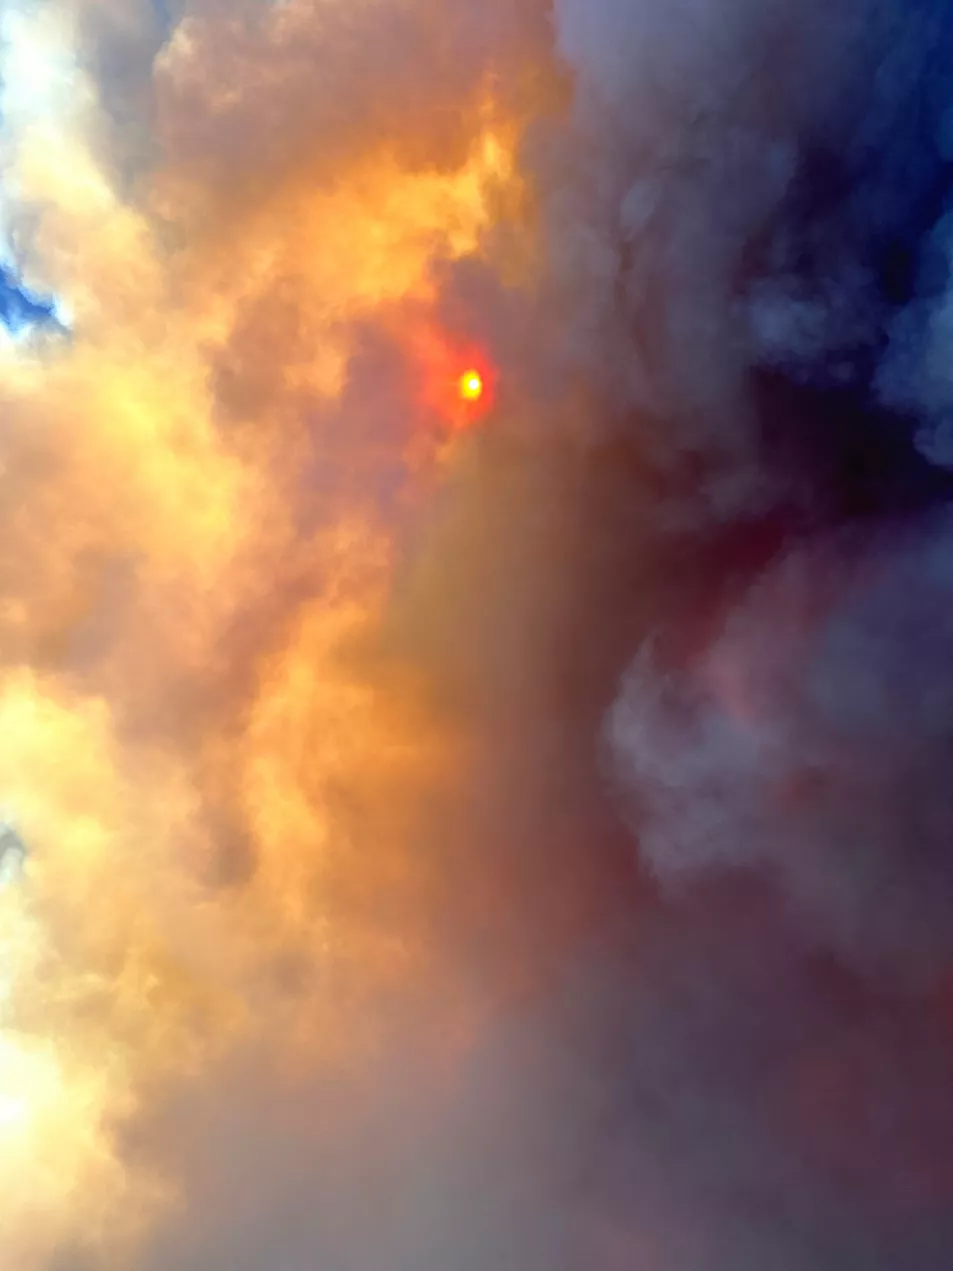 A large cloud of smoke covering the sun on Rhodes